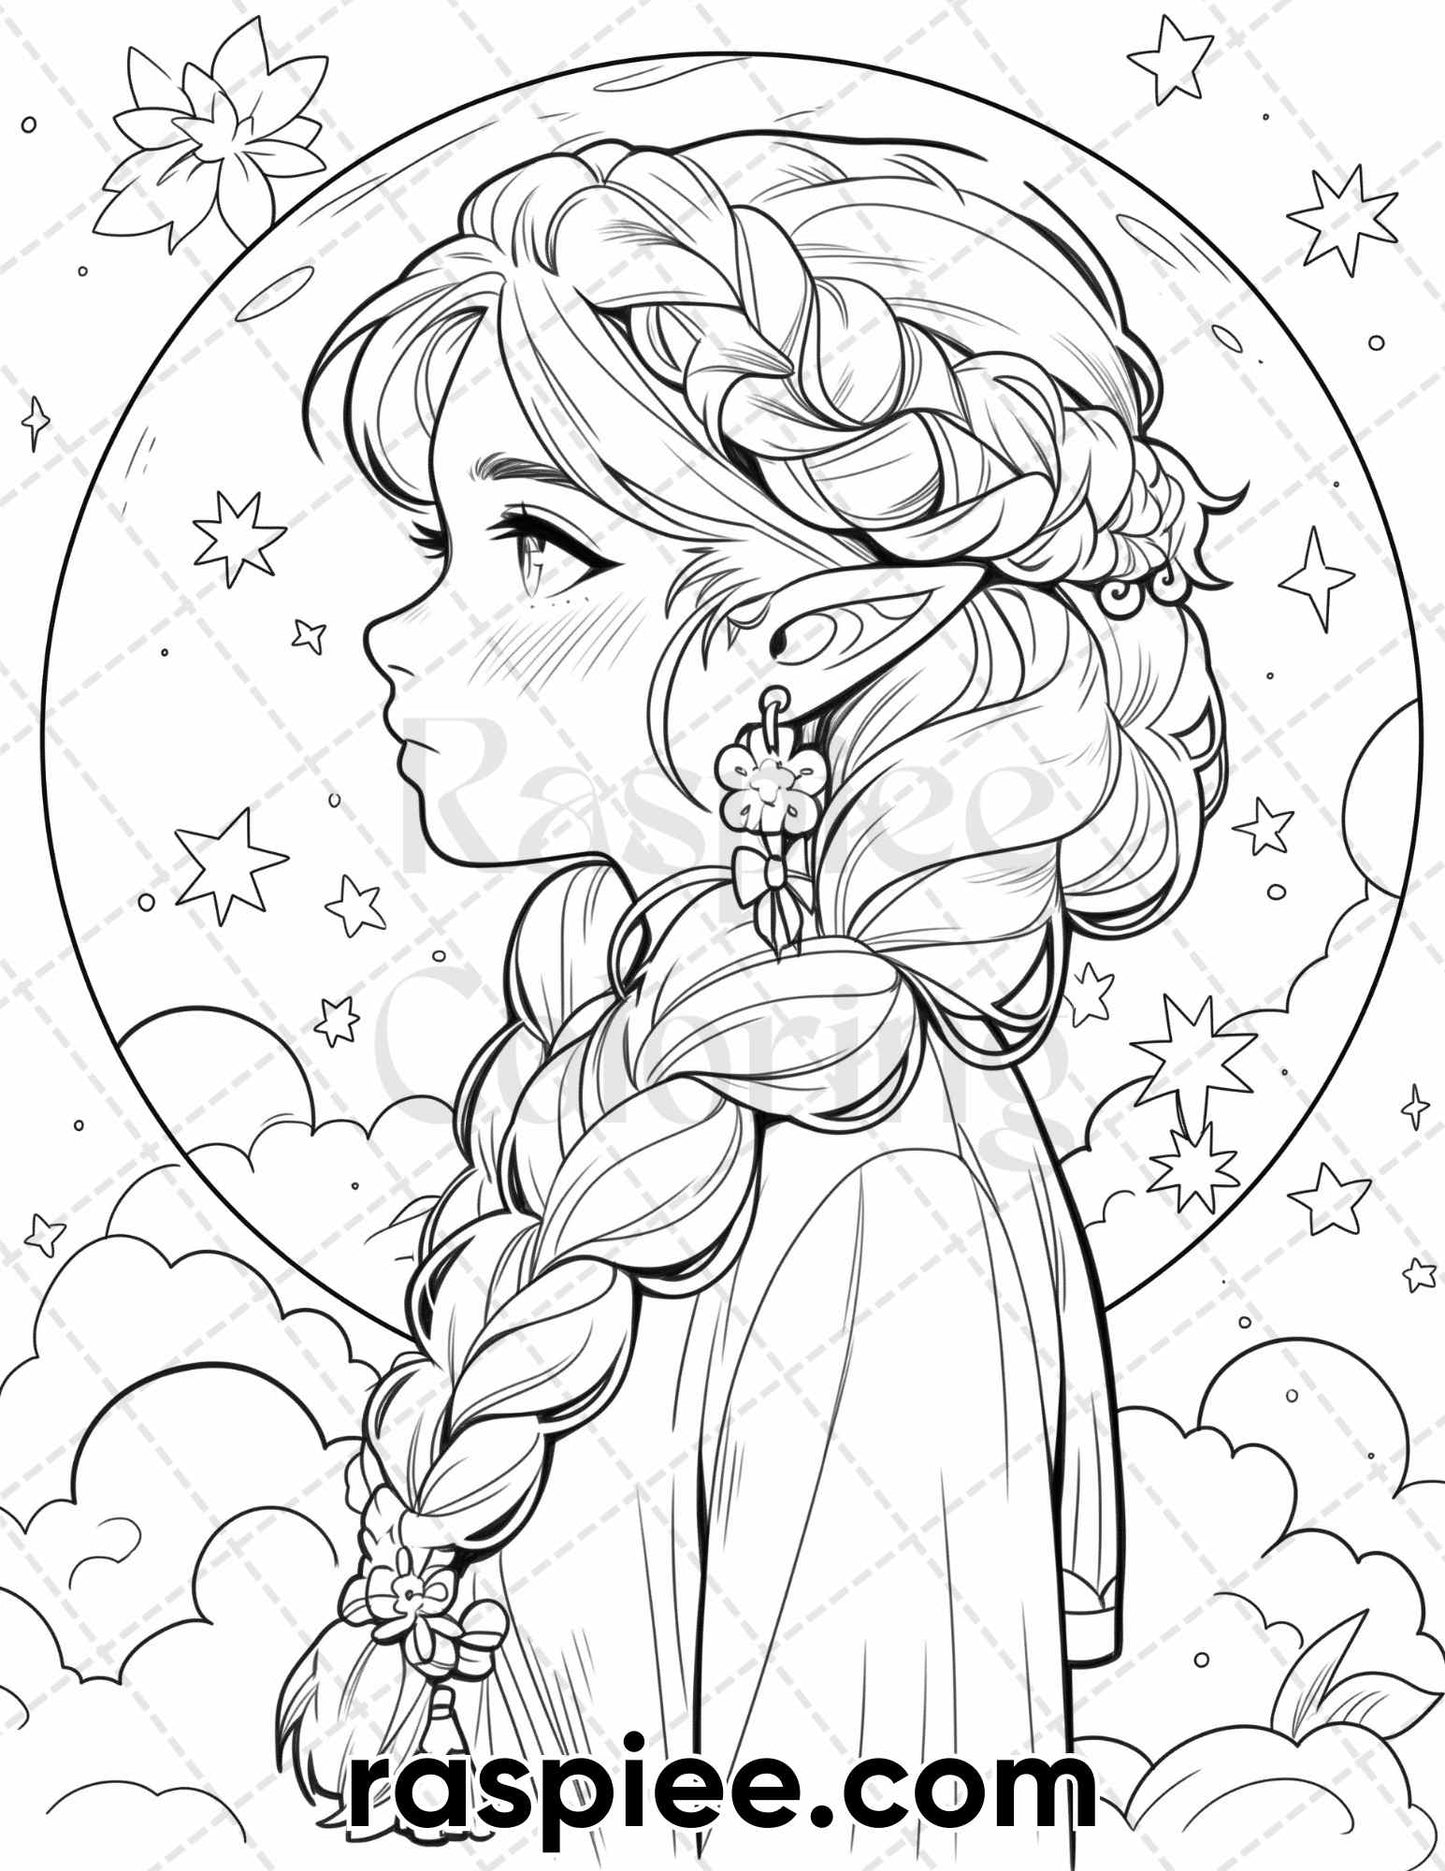 Cute Druid Girl Coloring Page, Fantasy Coloring Pages, Fantasy Coloring Book Printable, Relaxing Coloring for Adults, Grayscale Coloring Pages, Adult Coloring Pages